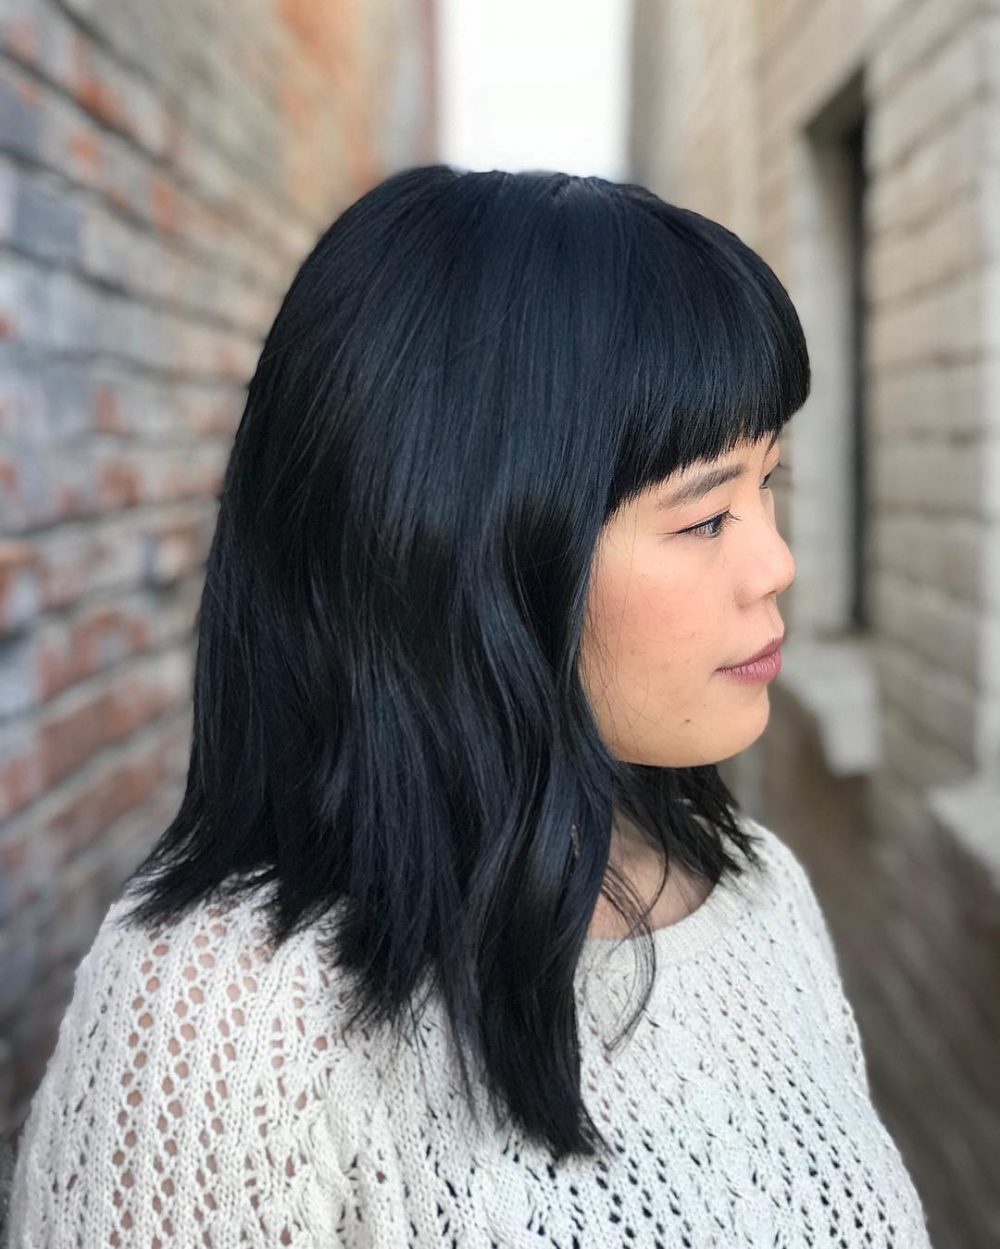 53 Medium Hairstyles With Bangs: Our Latest Faves!